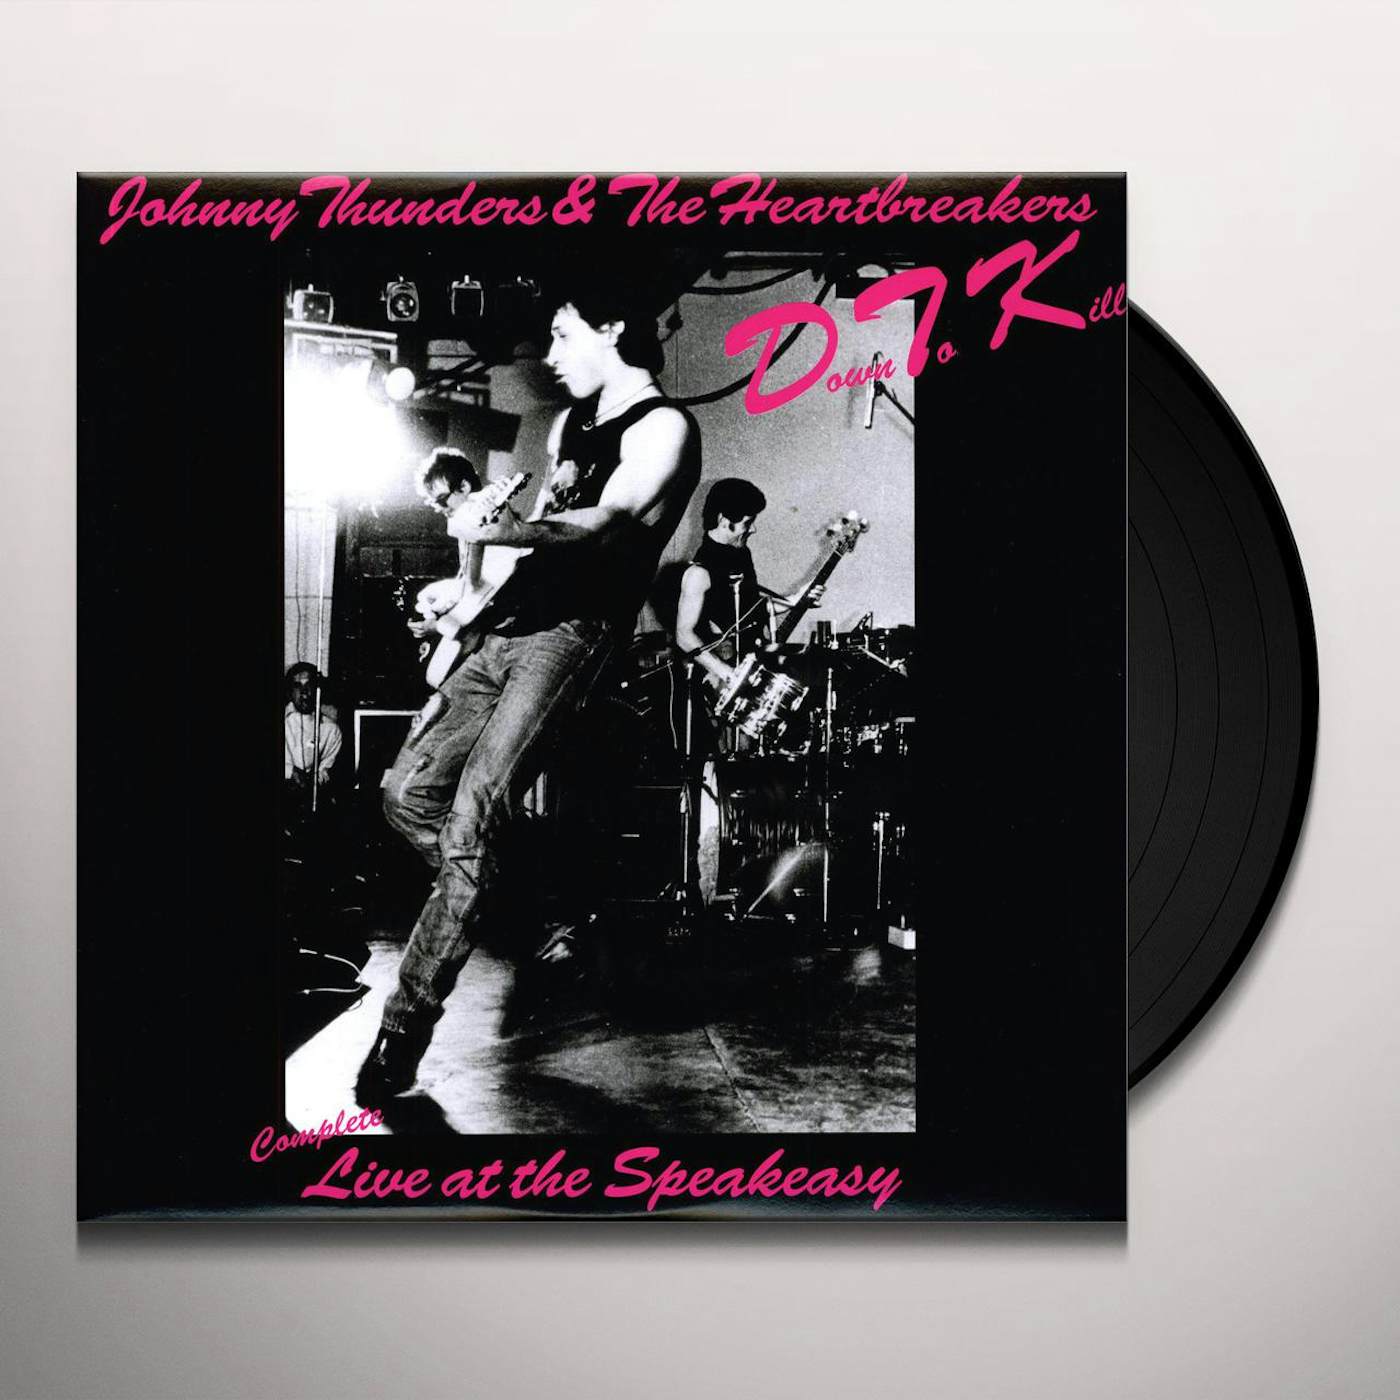 Johnny Thunders & The Heartbreakers DOWN TO KILL: THE COMPLETE LIVE AT THE SPEAKEASY Vinyl Record